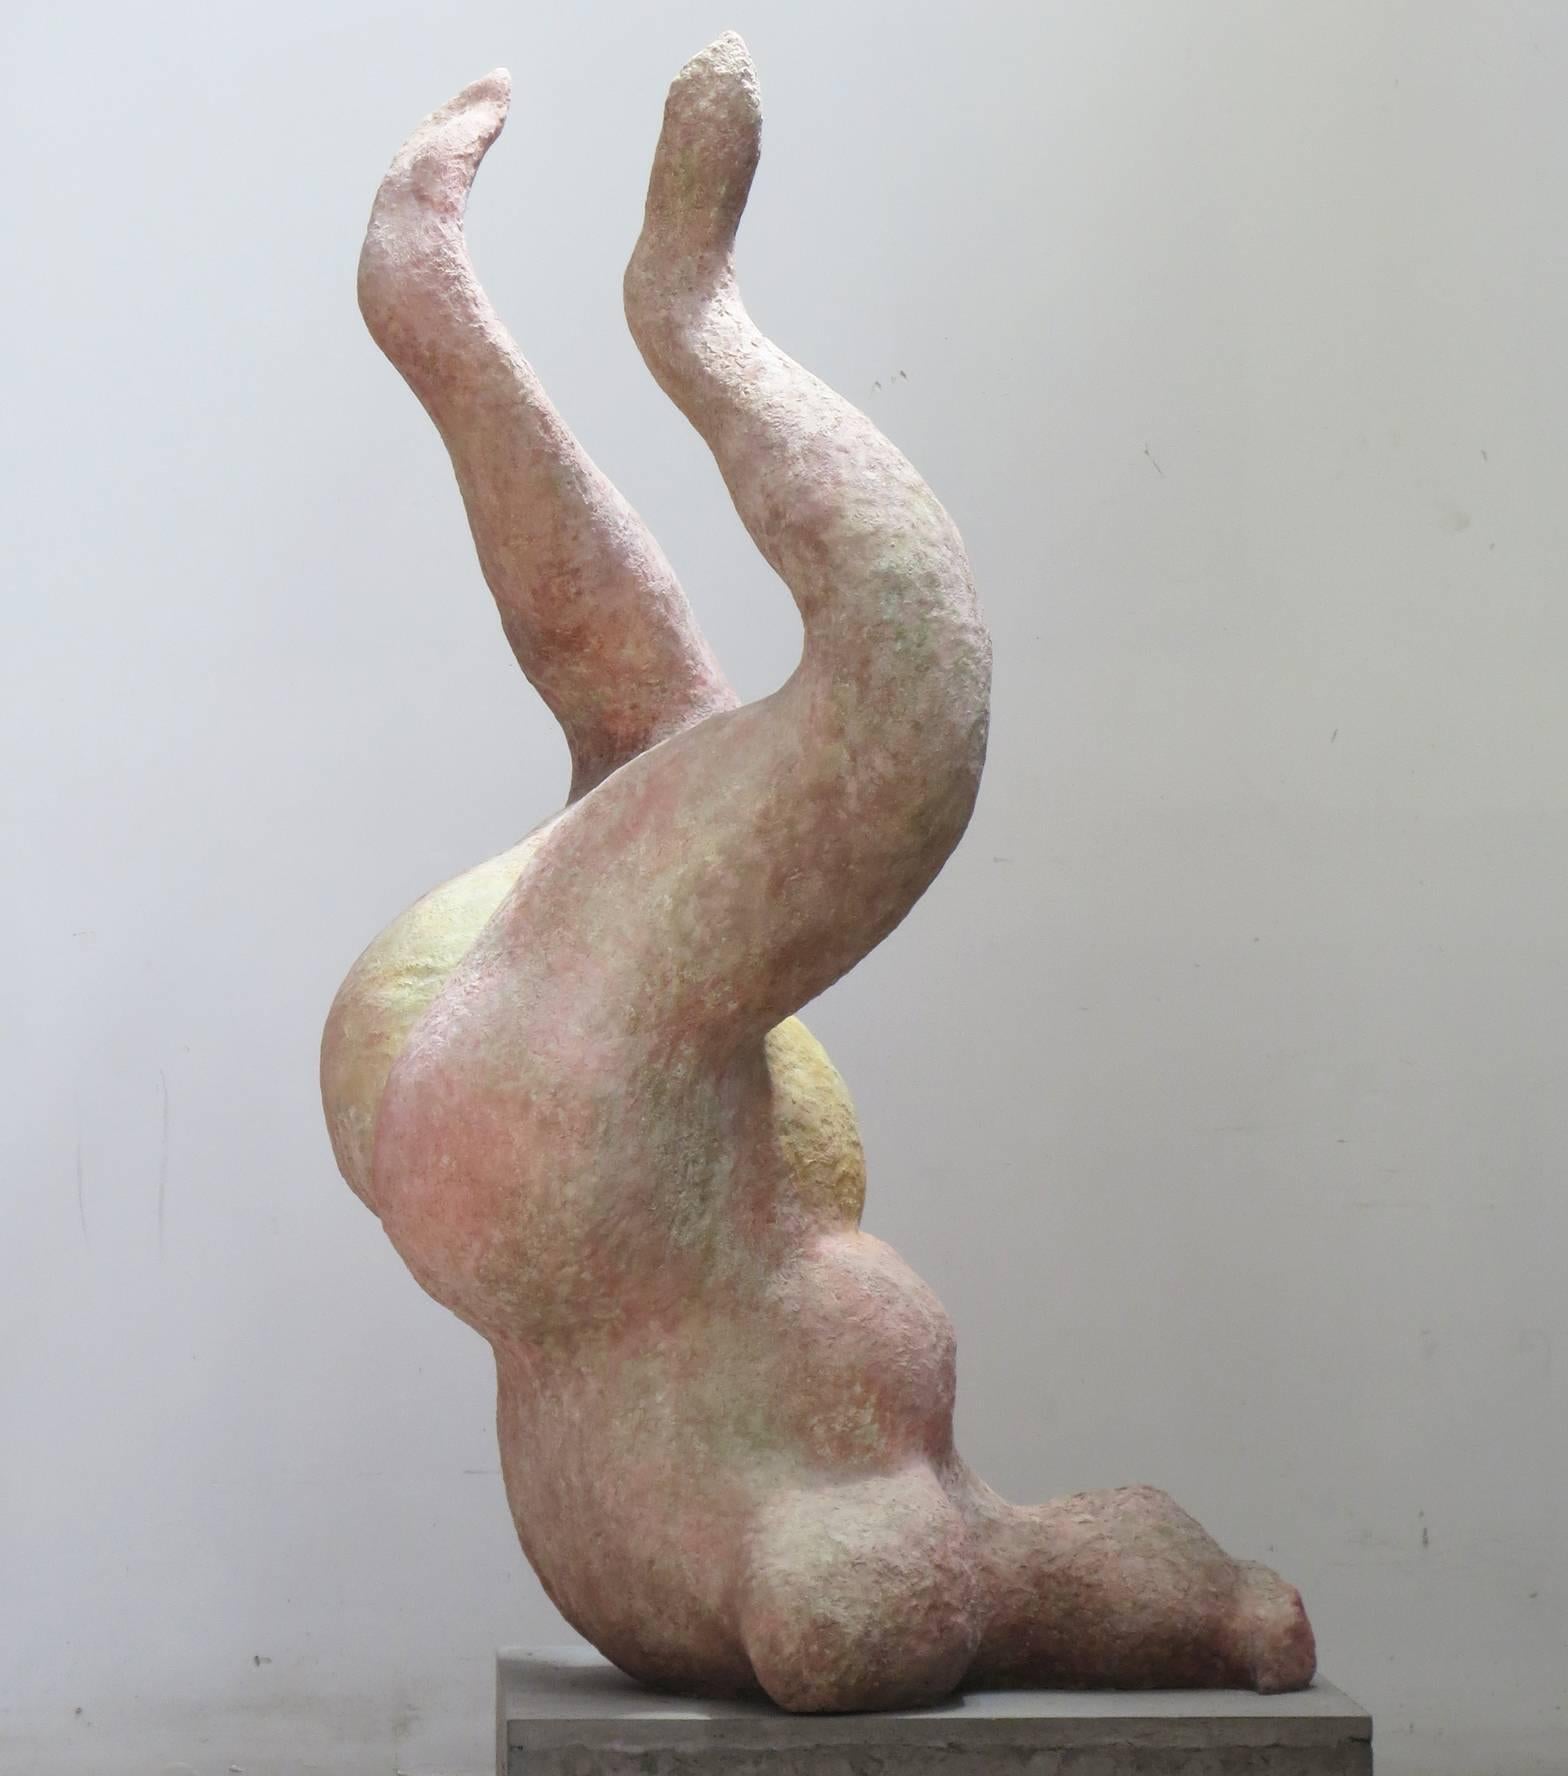 Howard Kalish Abstract Sculpture - "Danae", mythological princess seduced by Zeus spirals in pale pinks and yellows